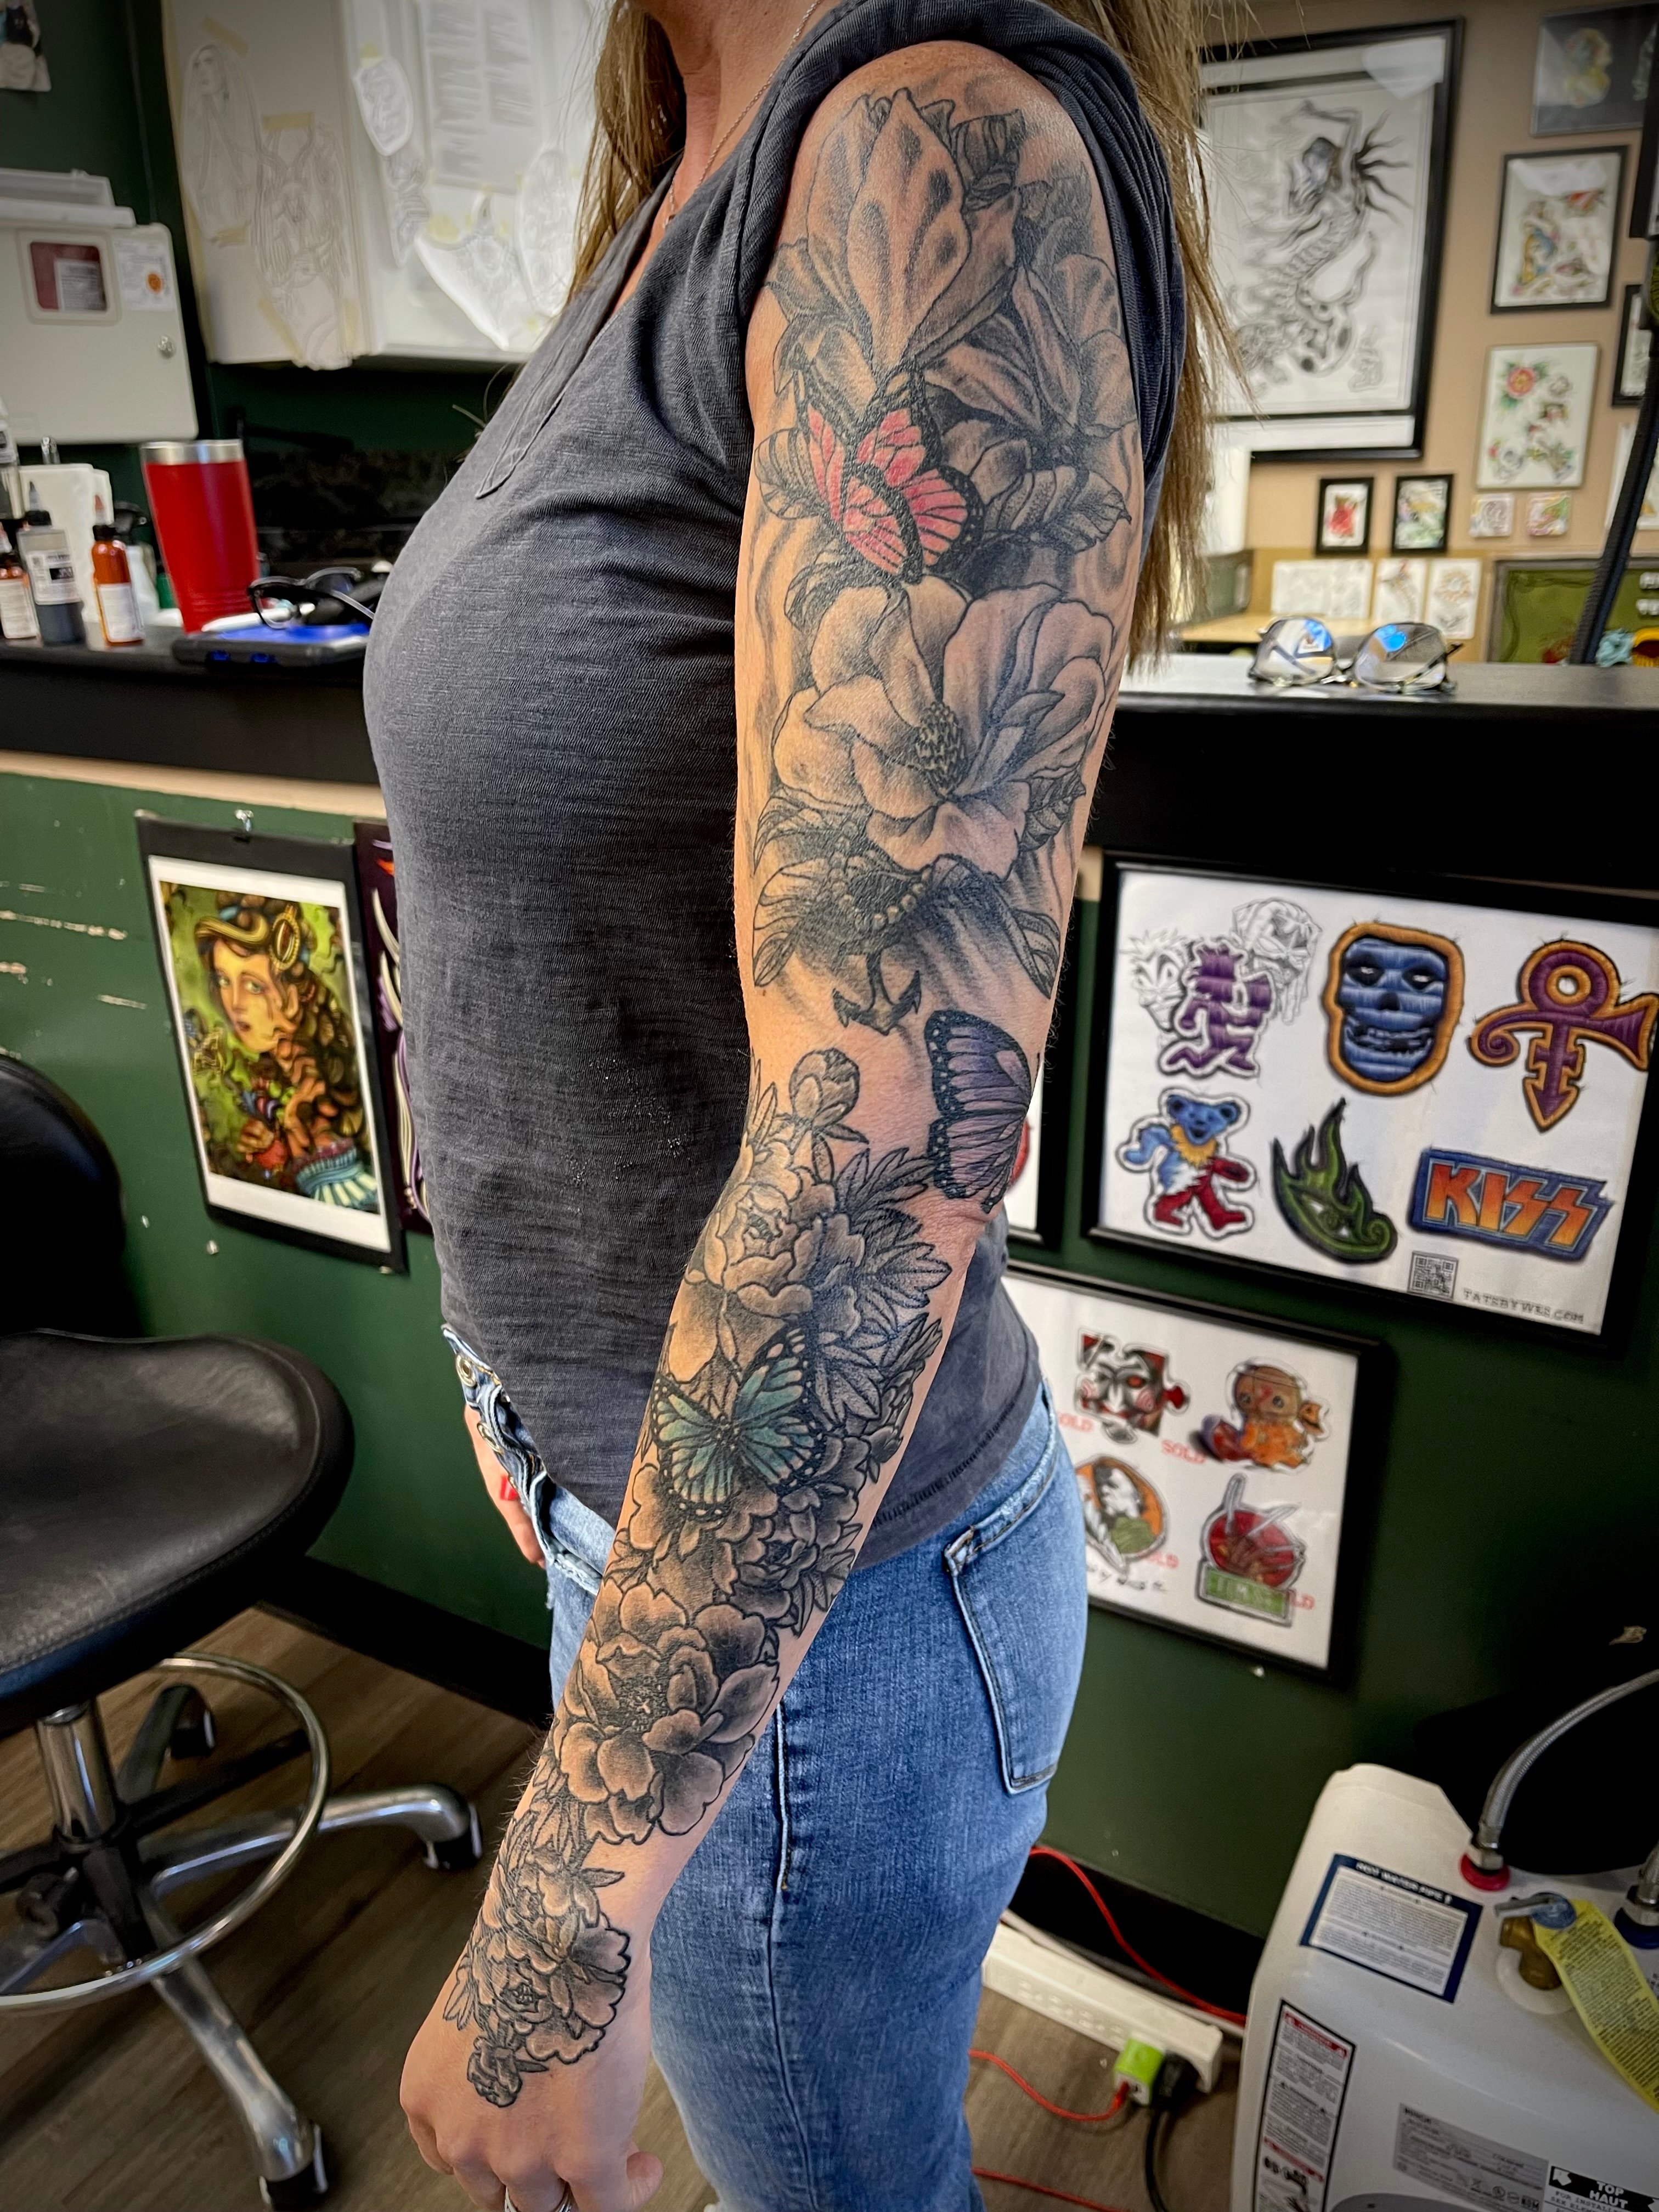 Tattoos for Women - ful sleeve color